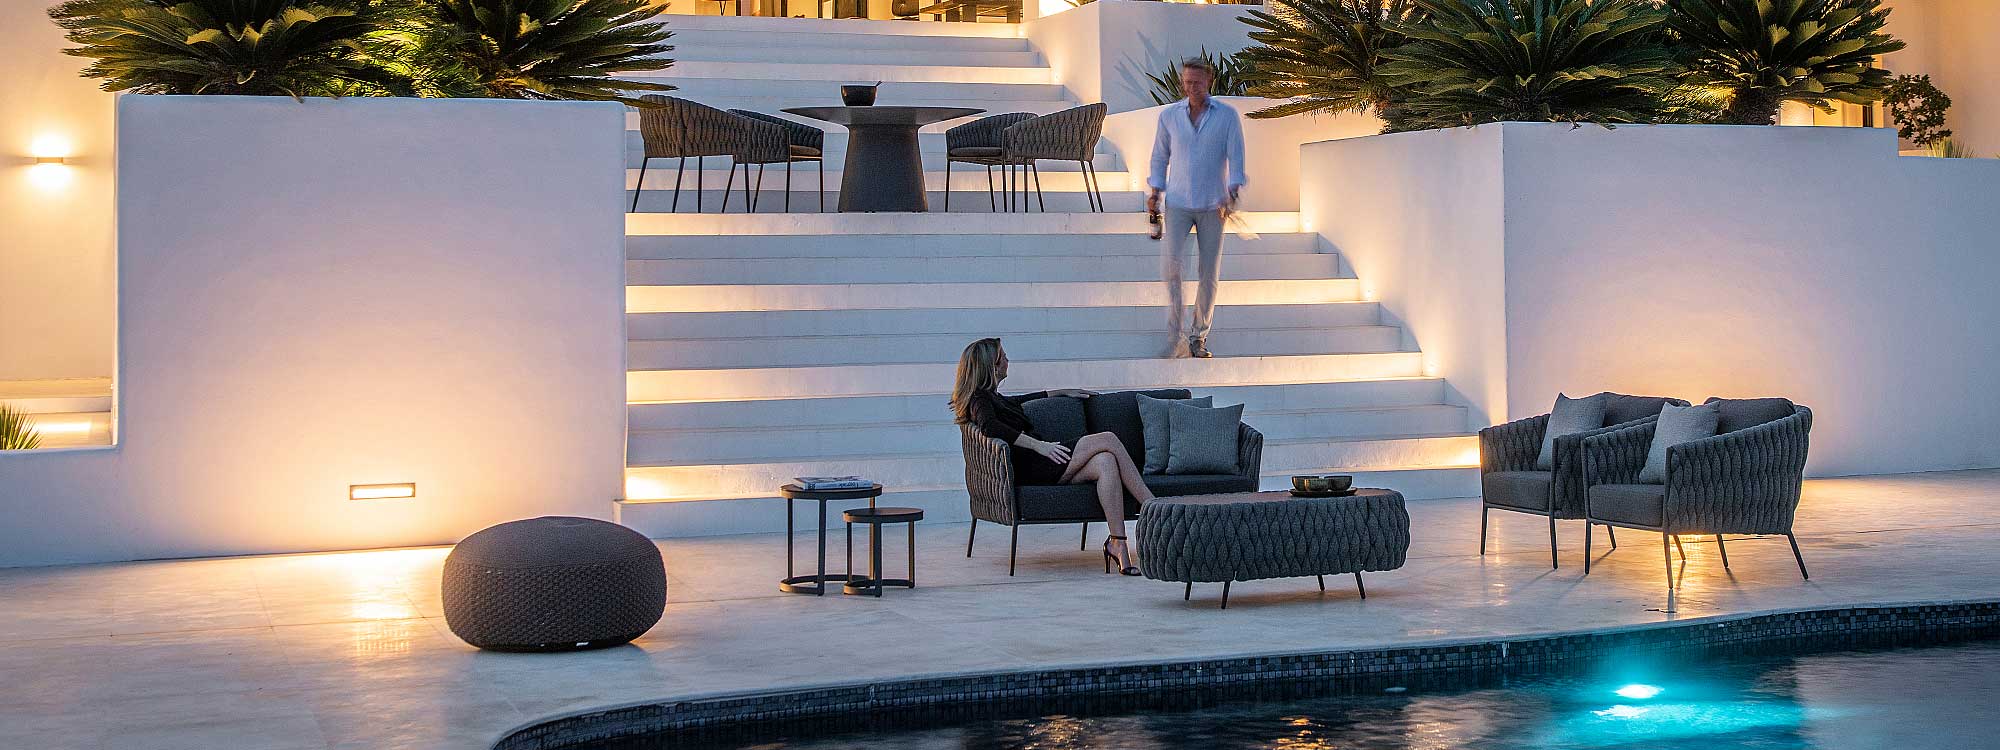 Nighttime image of illuminated white-washed terrace with Fortuna Socks garden sofa and lounge chairs in Charcoal black finish, with Fortuna Socks dining chairs shown at the top of large flight of stairs